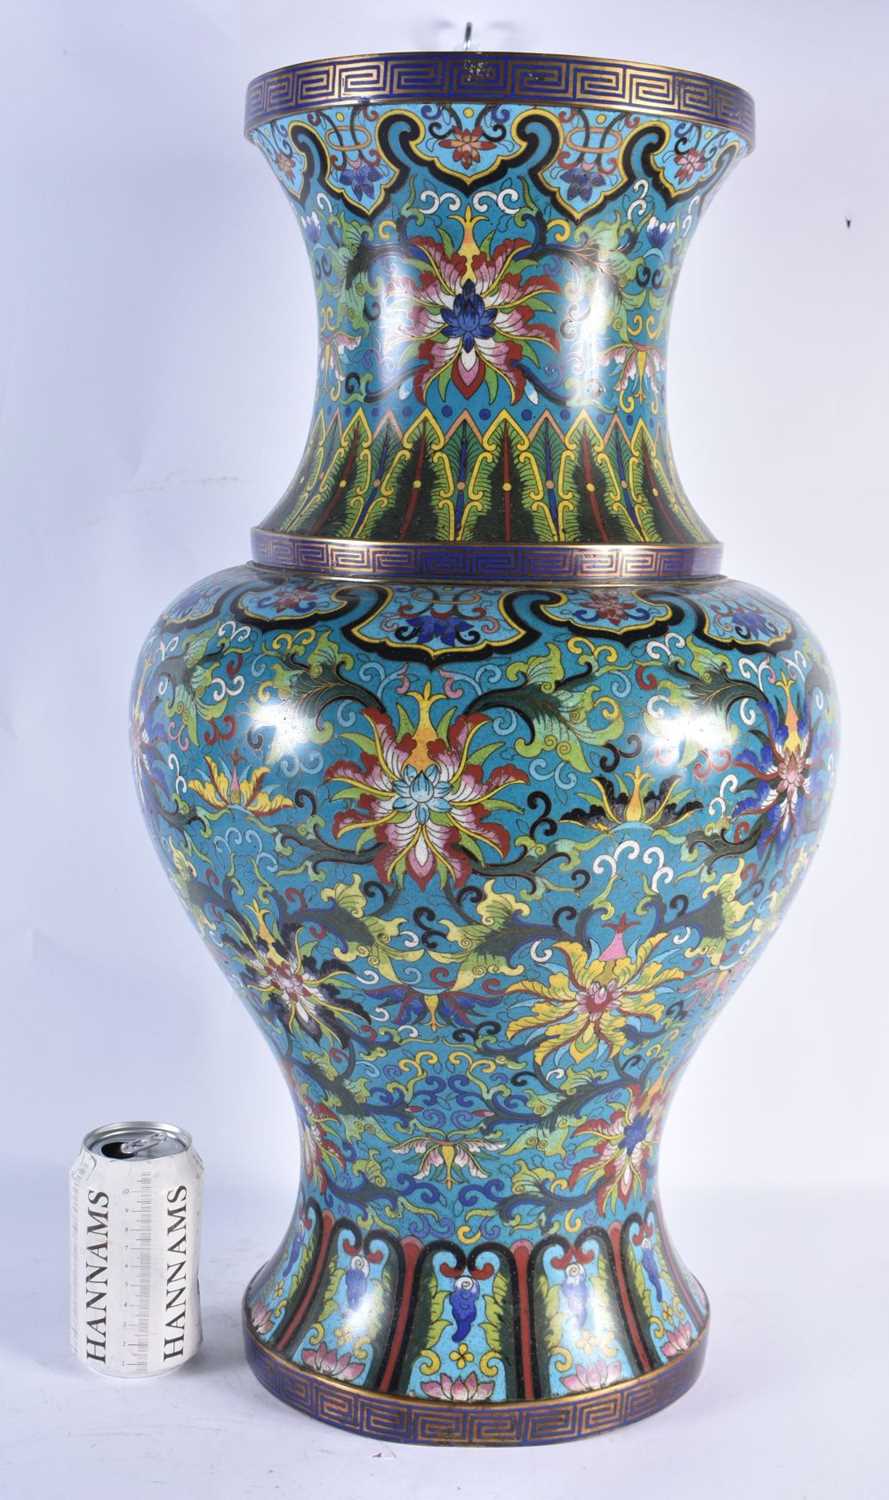 A VERY LARGE EARLY 20TH CENTURY CHINESE CLOISONNE ENAMEL VASE Late Qing/Republic, decorated with